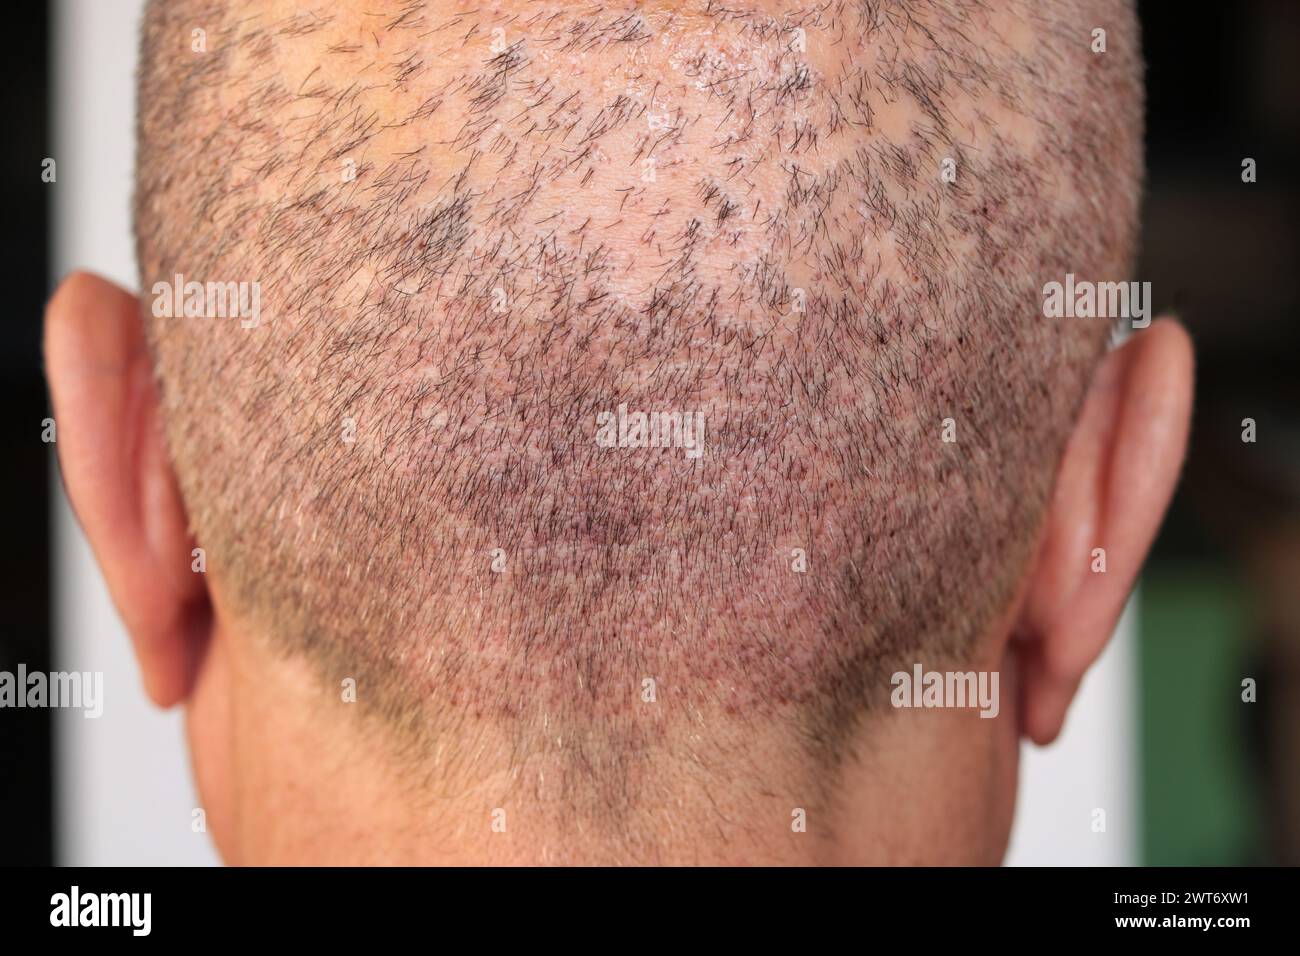 back view of a man's head with hair transplant surgery area, one week after the transplant Stock Photo